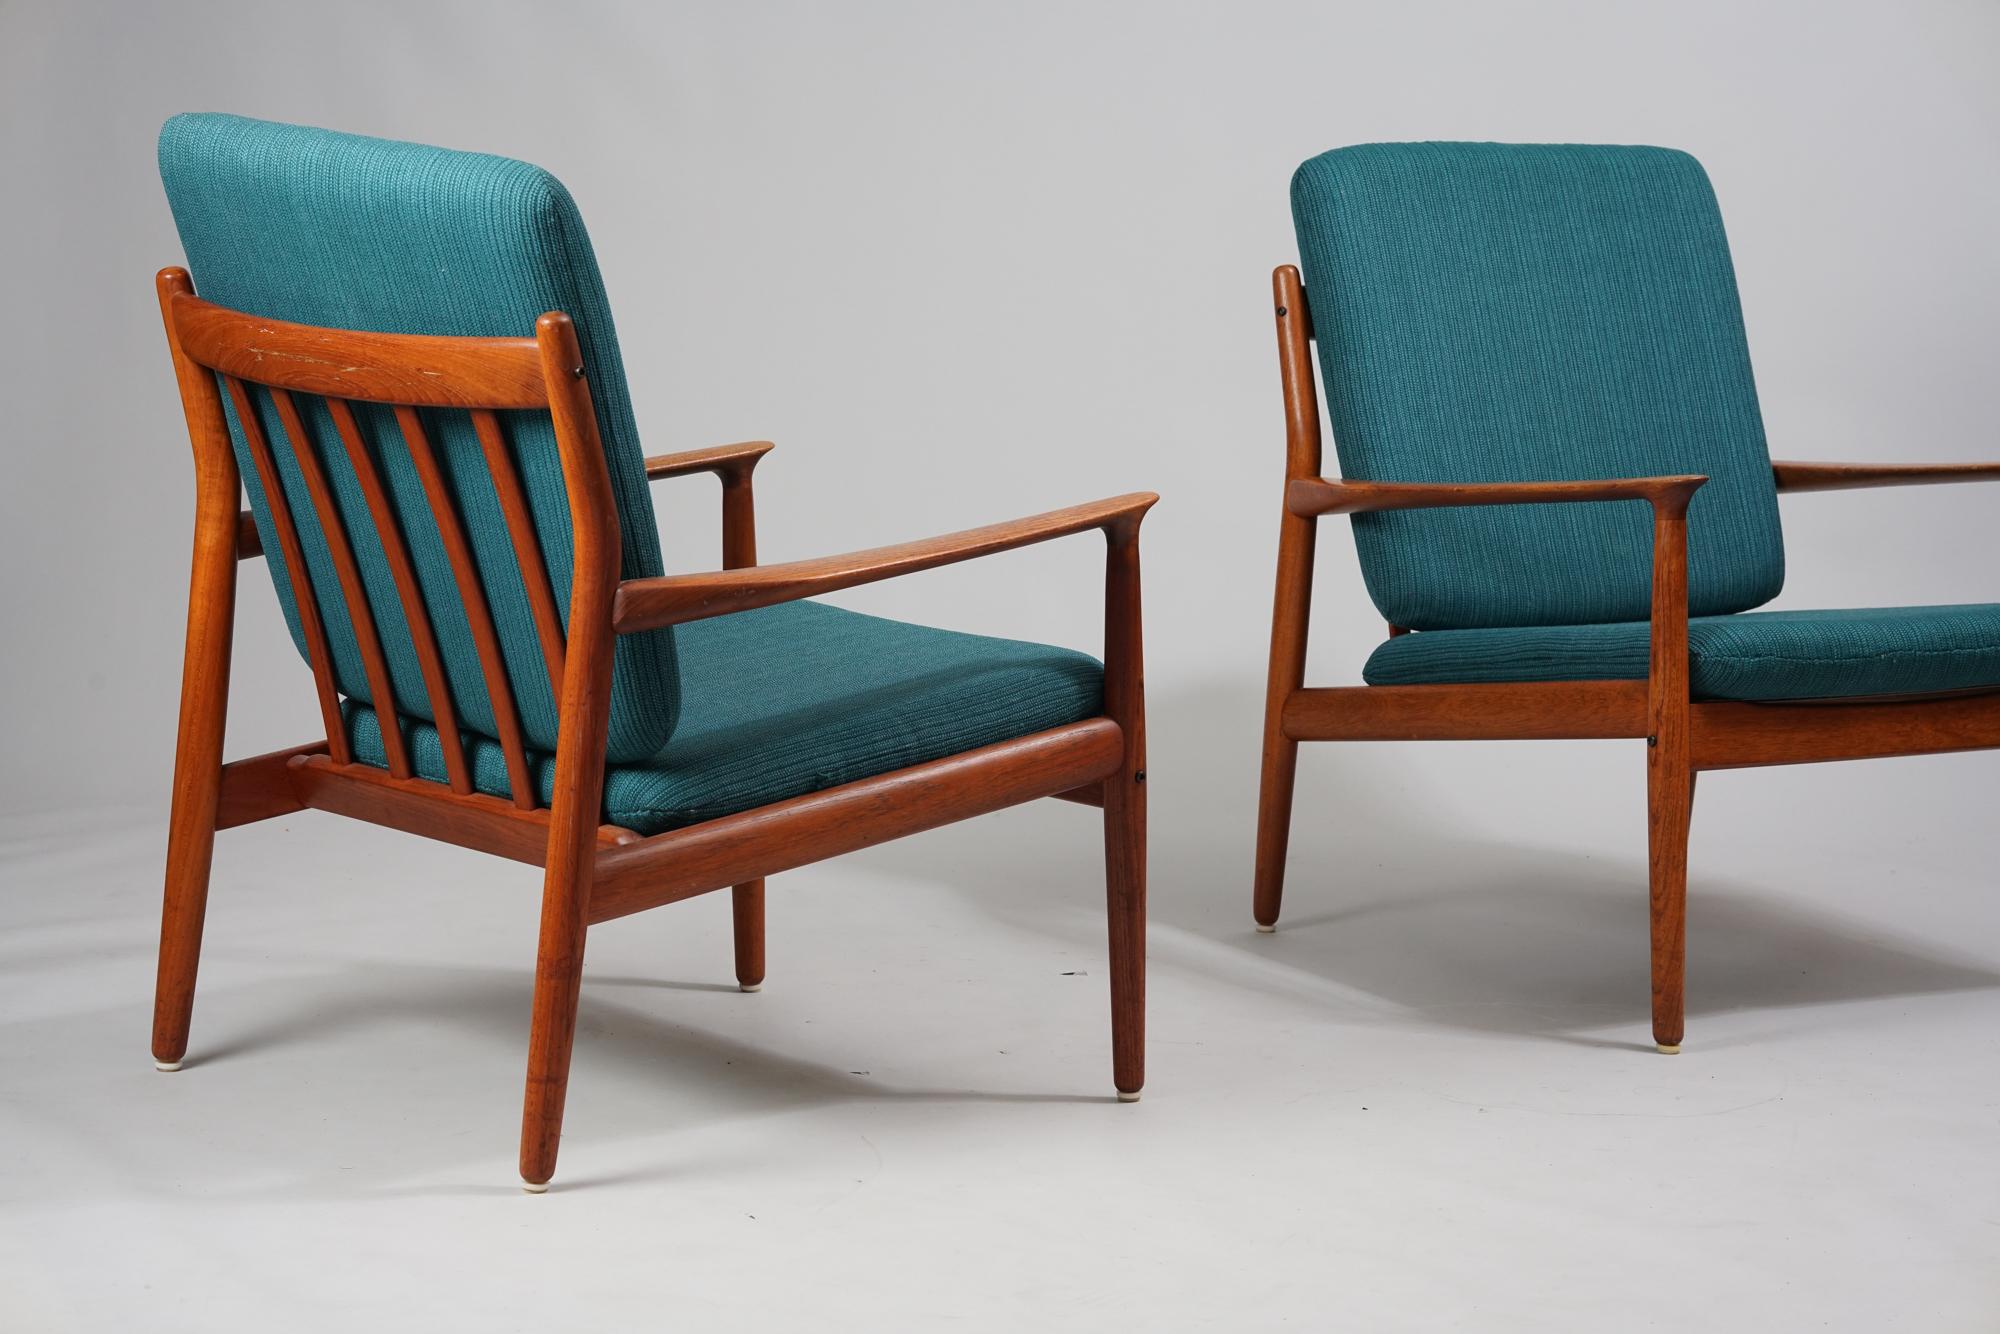 Set of two armchairs by Grete Jalk from the 1960s. Teak frame with fabric upholstery. Good vintage condition, minor wear and patina consistent with age and use. The armchairs are sold as a set. 

Recognized as an important Danish modernist